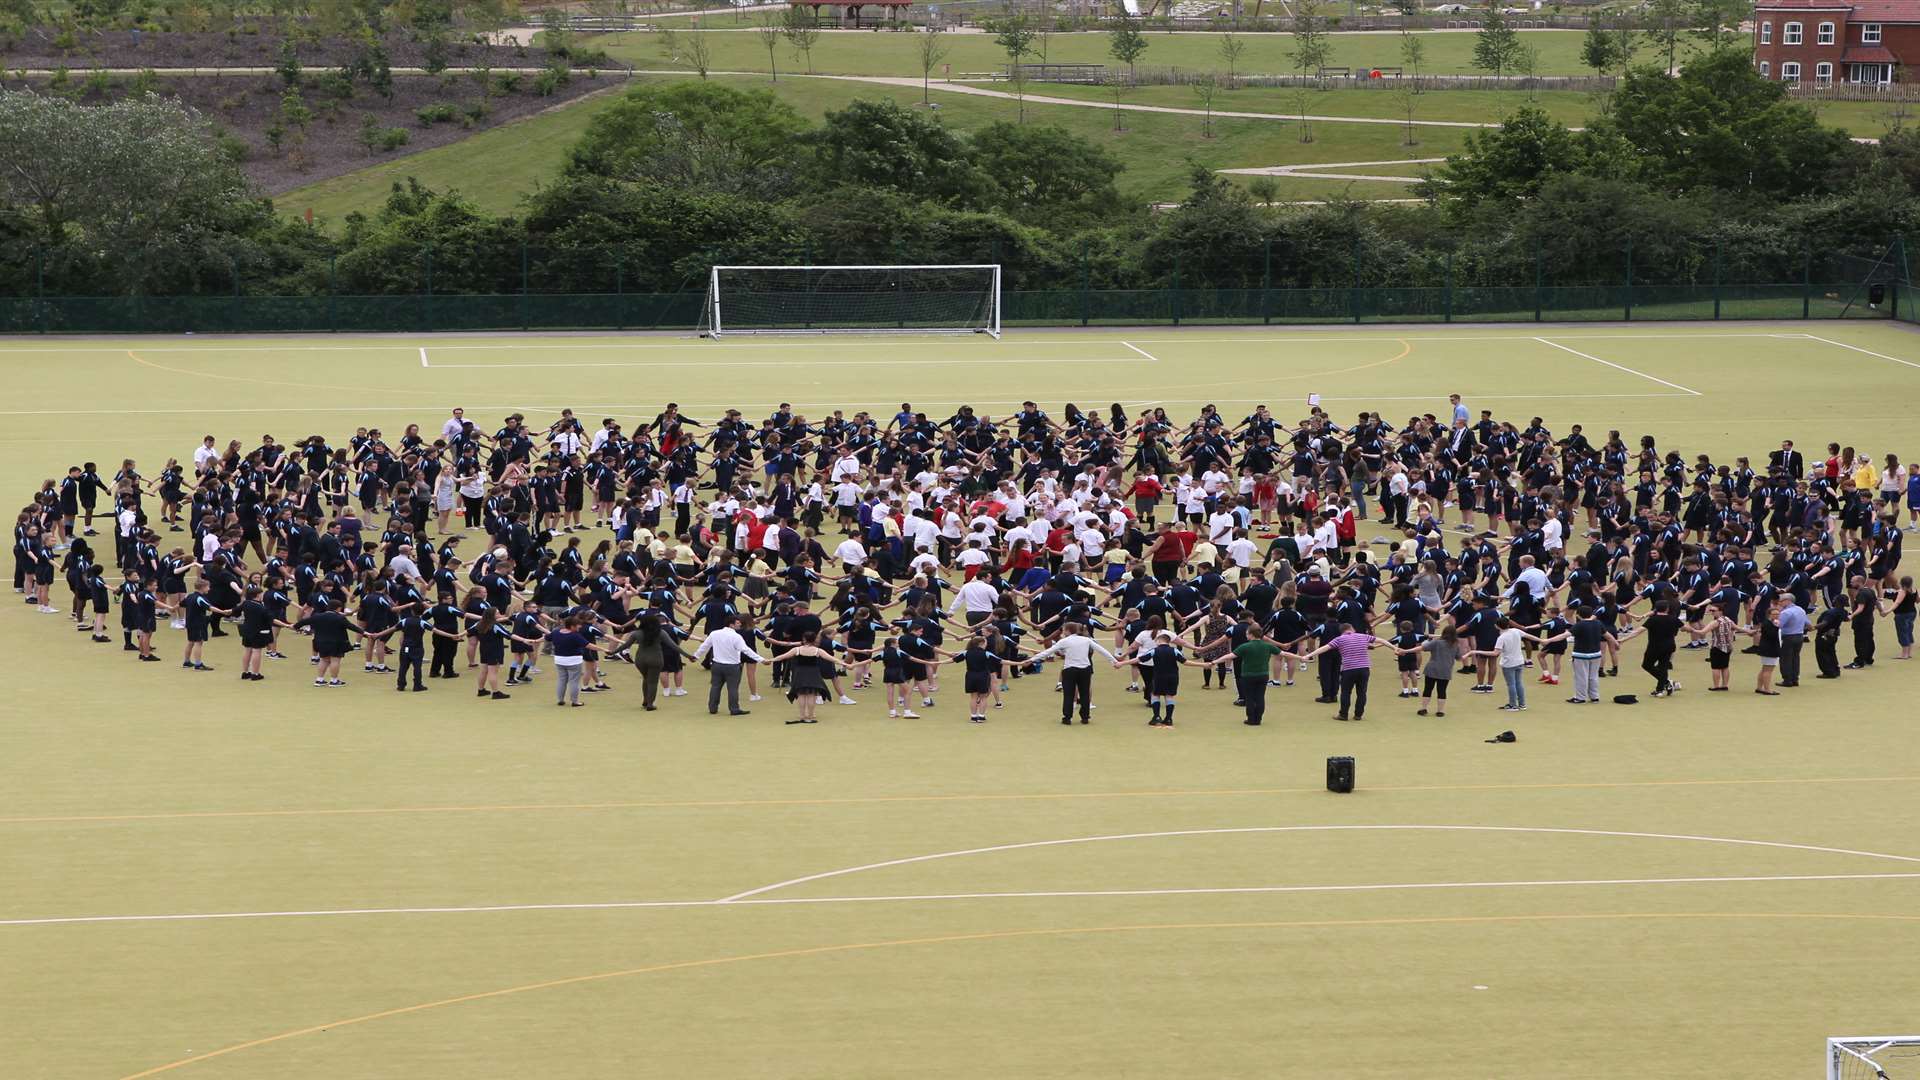 600 staff and students from The Ebbsfleet Academy and other schools on a mission to break a Guinness World Record by forming the longest ever human chain to fit through a hula hoop at Ebbsfleet Academy.